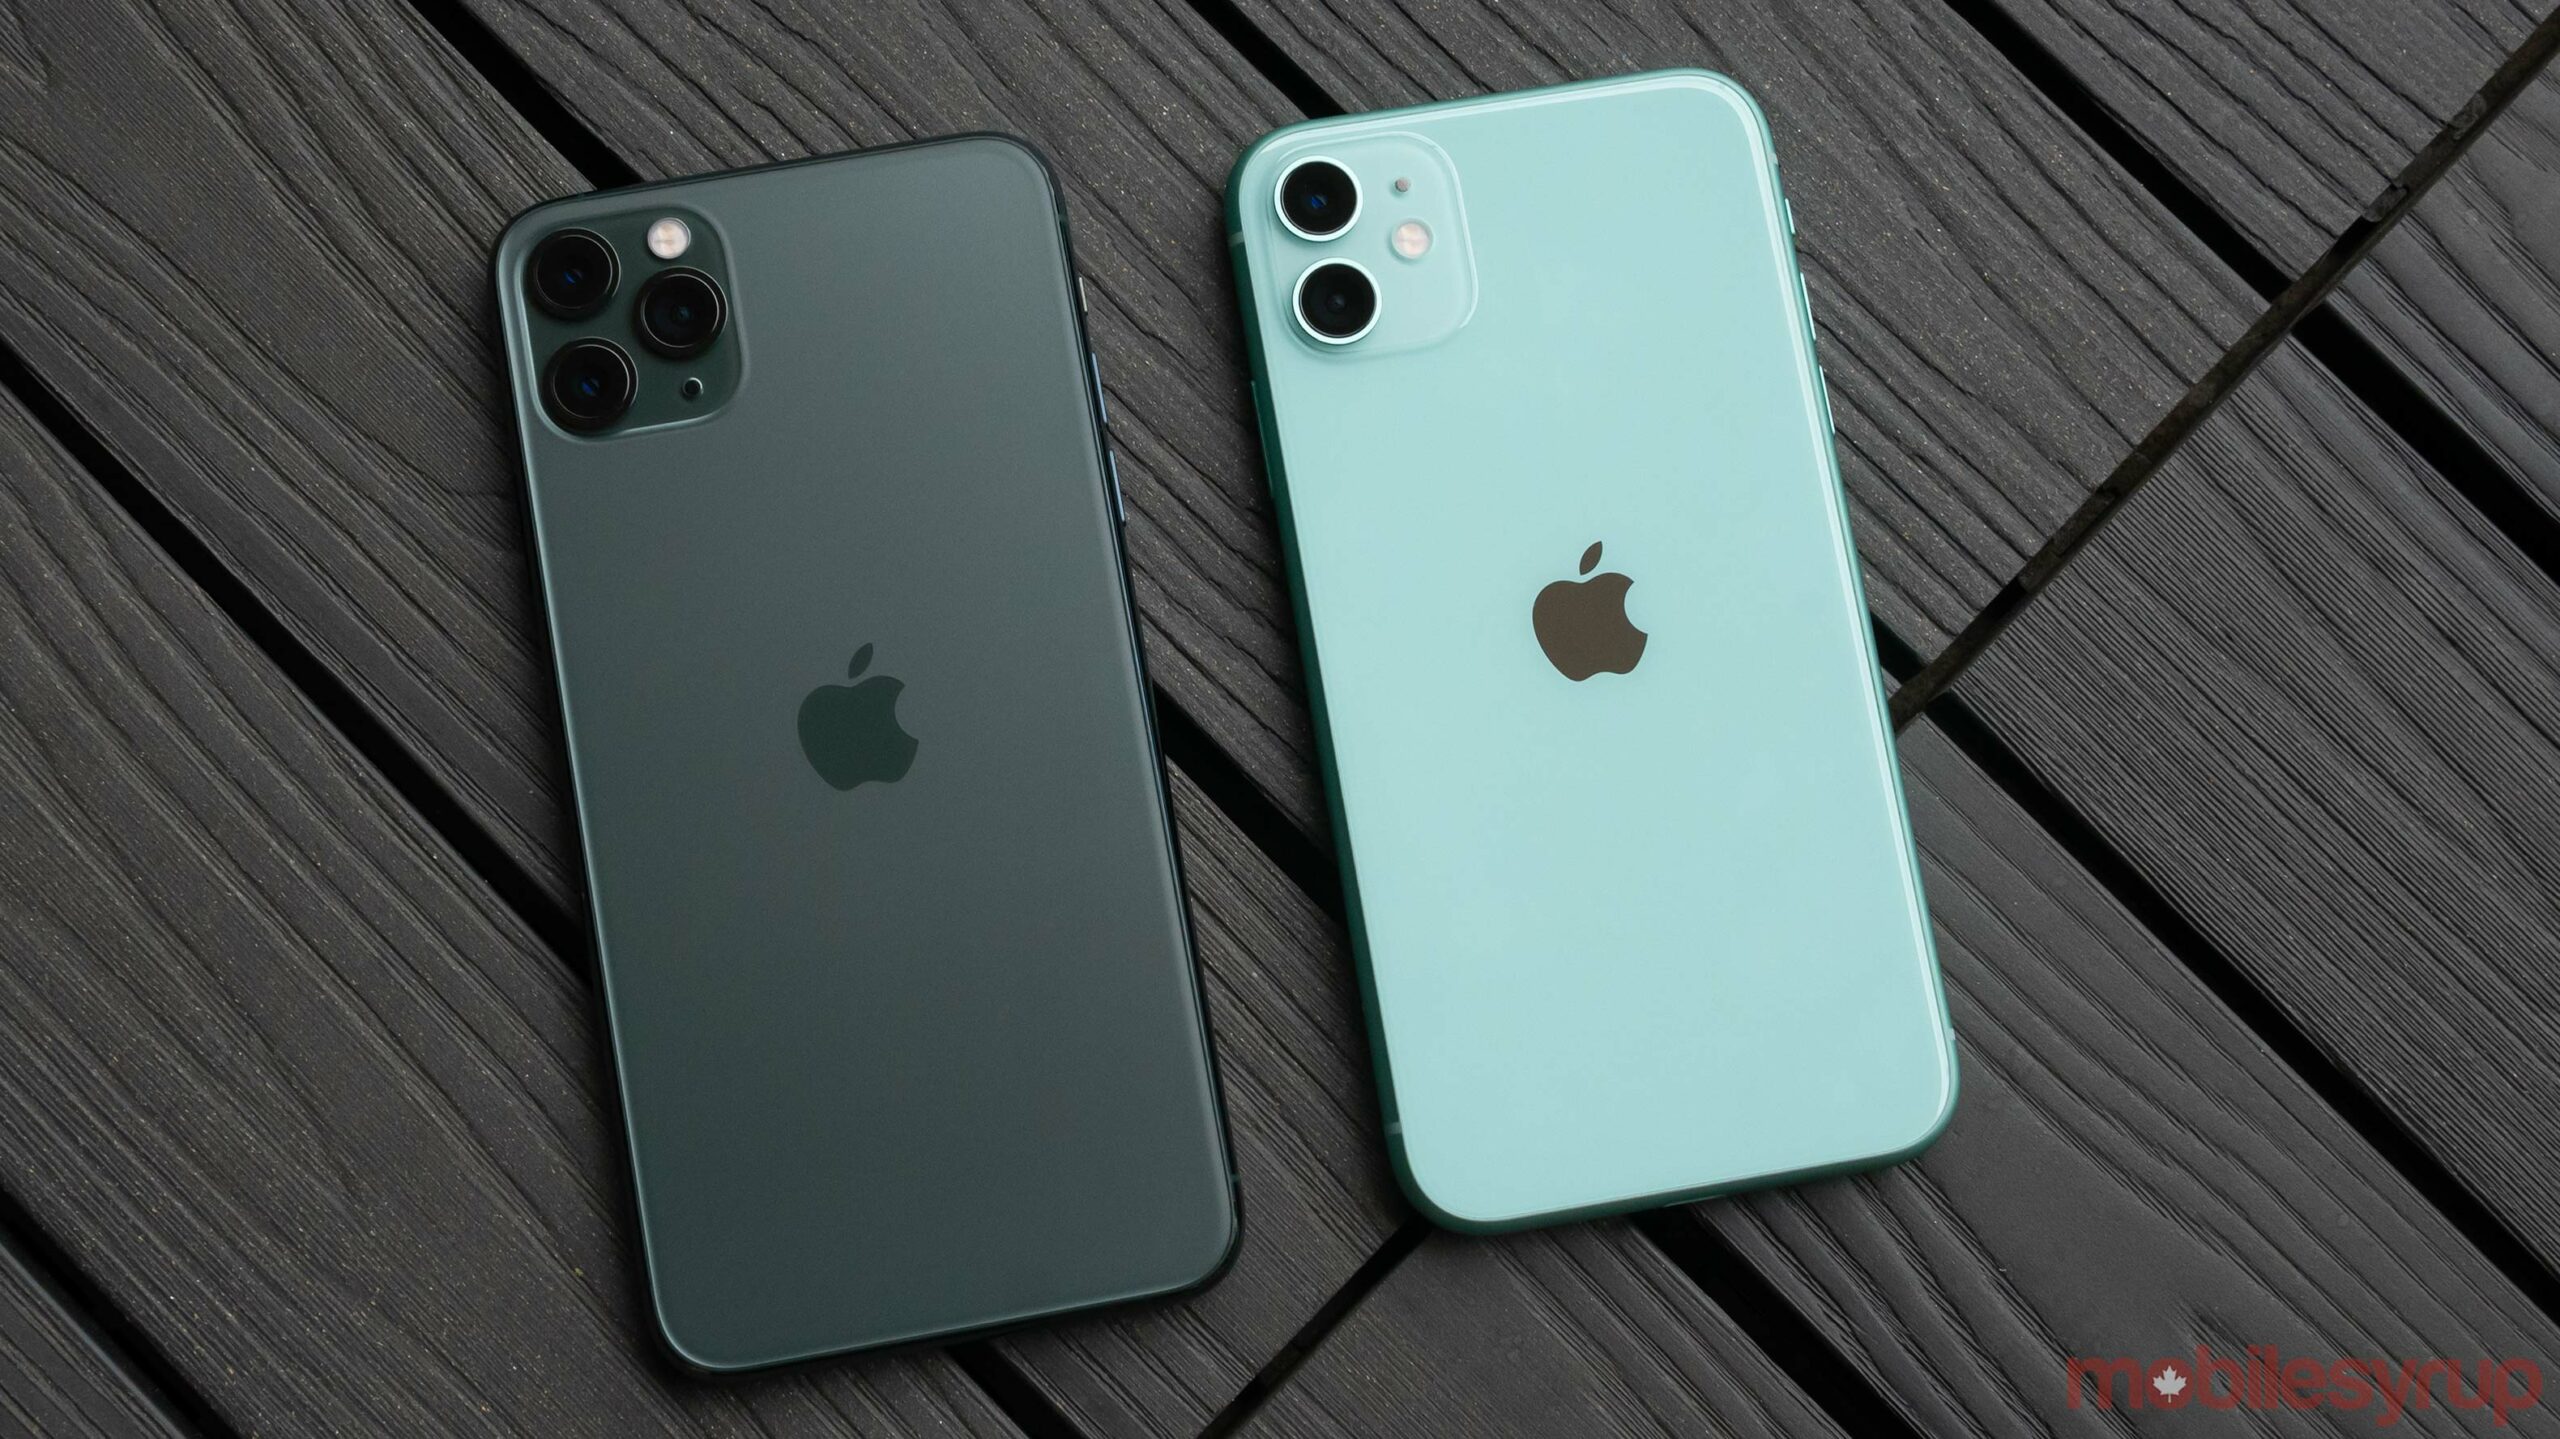 iPhone 11 and iPhone 11 Pro